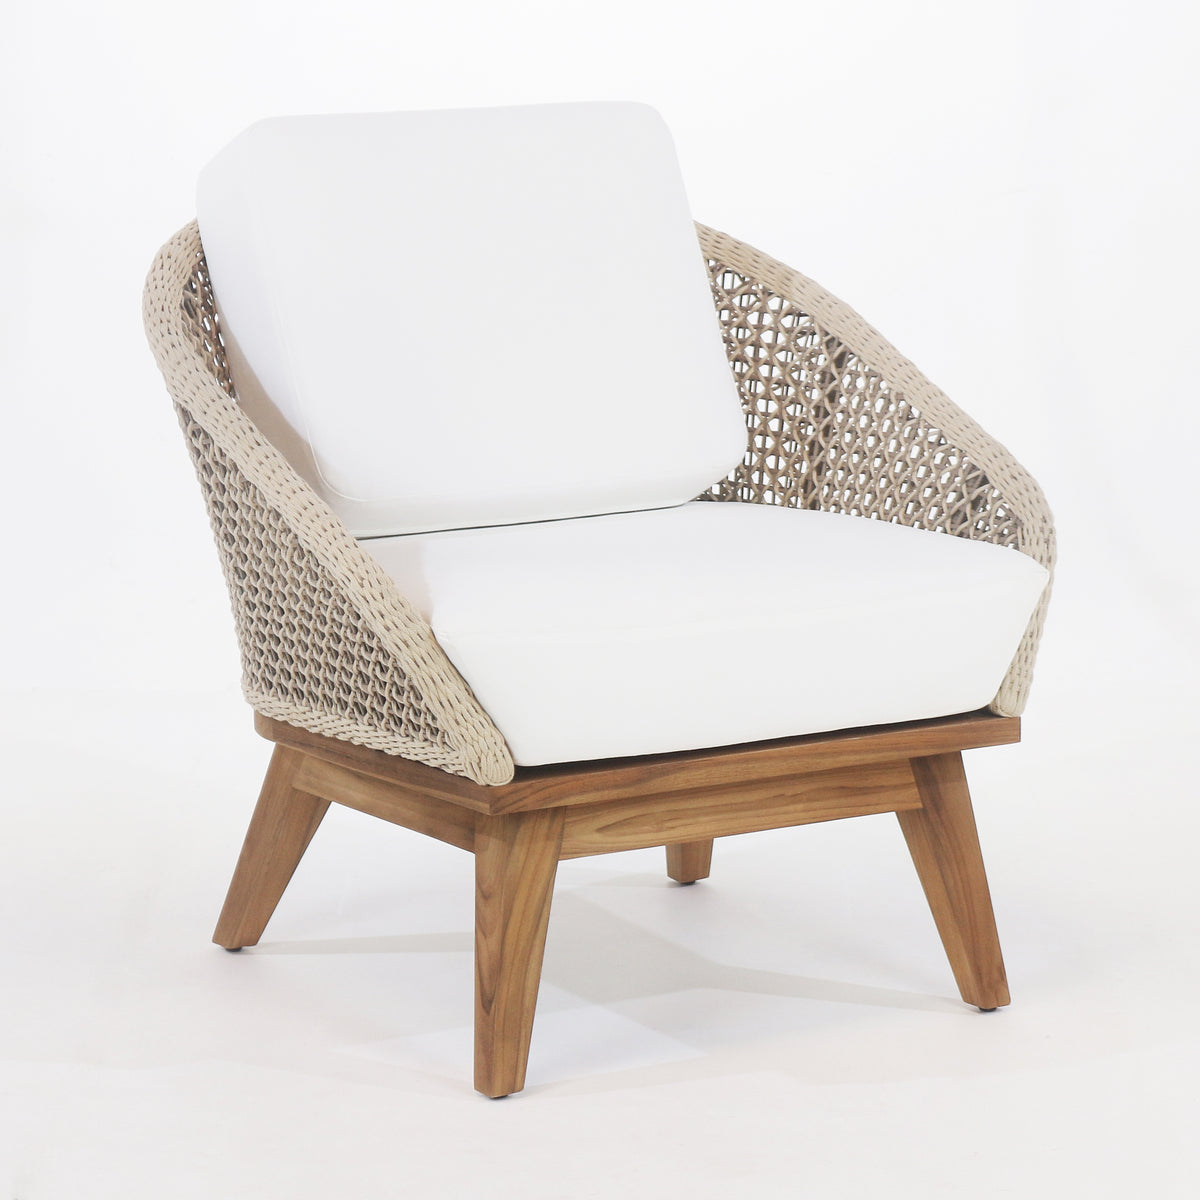 Surakarta Outdoor Accent Chair with UV protected outdoor weaving - INTERIORTONIC